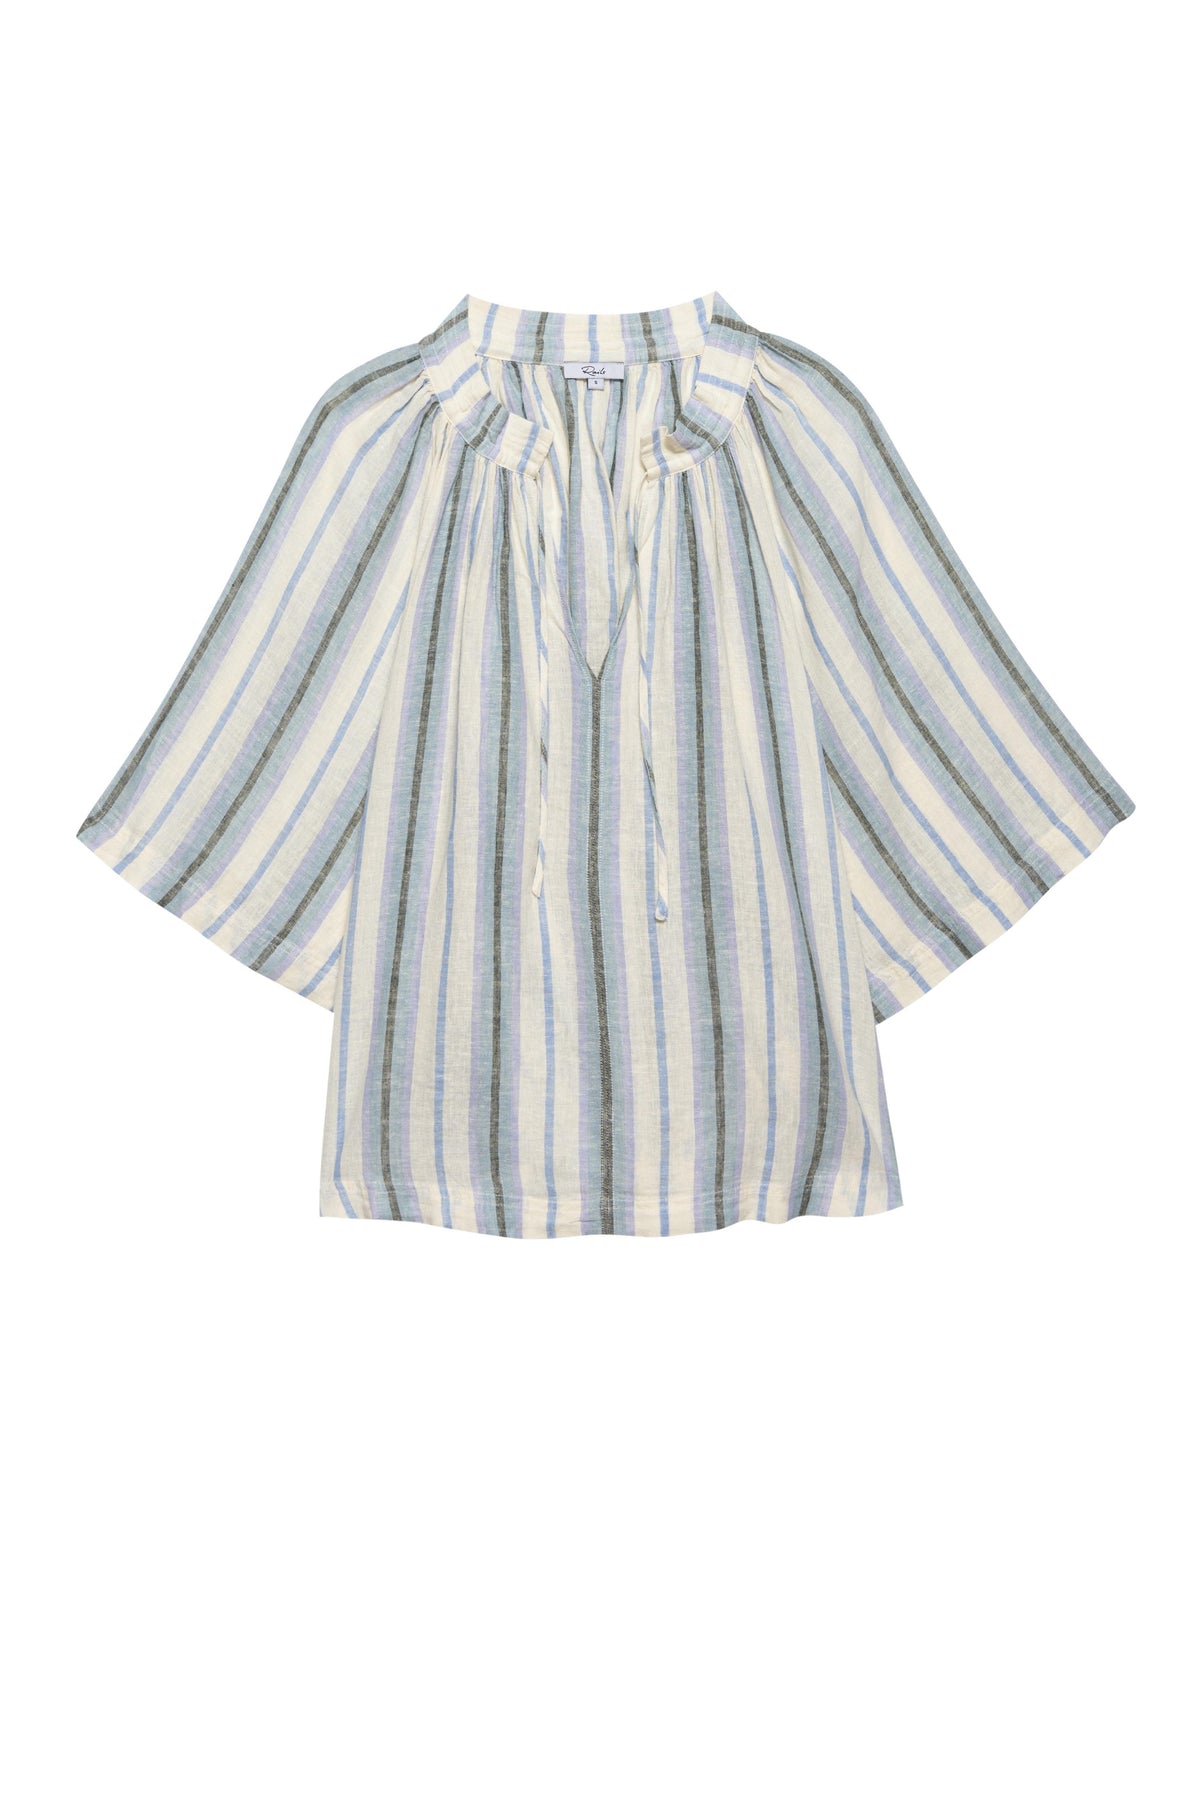 Ecru and blue striped shirt with notch neck tie detail and short sleeves